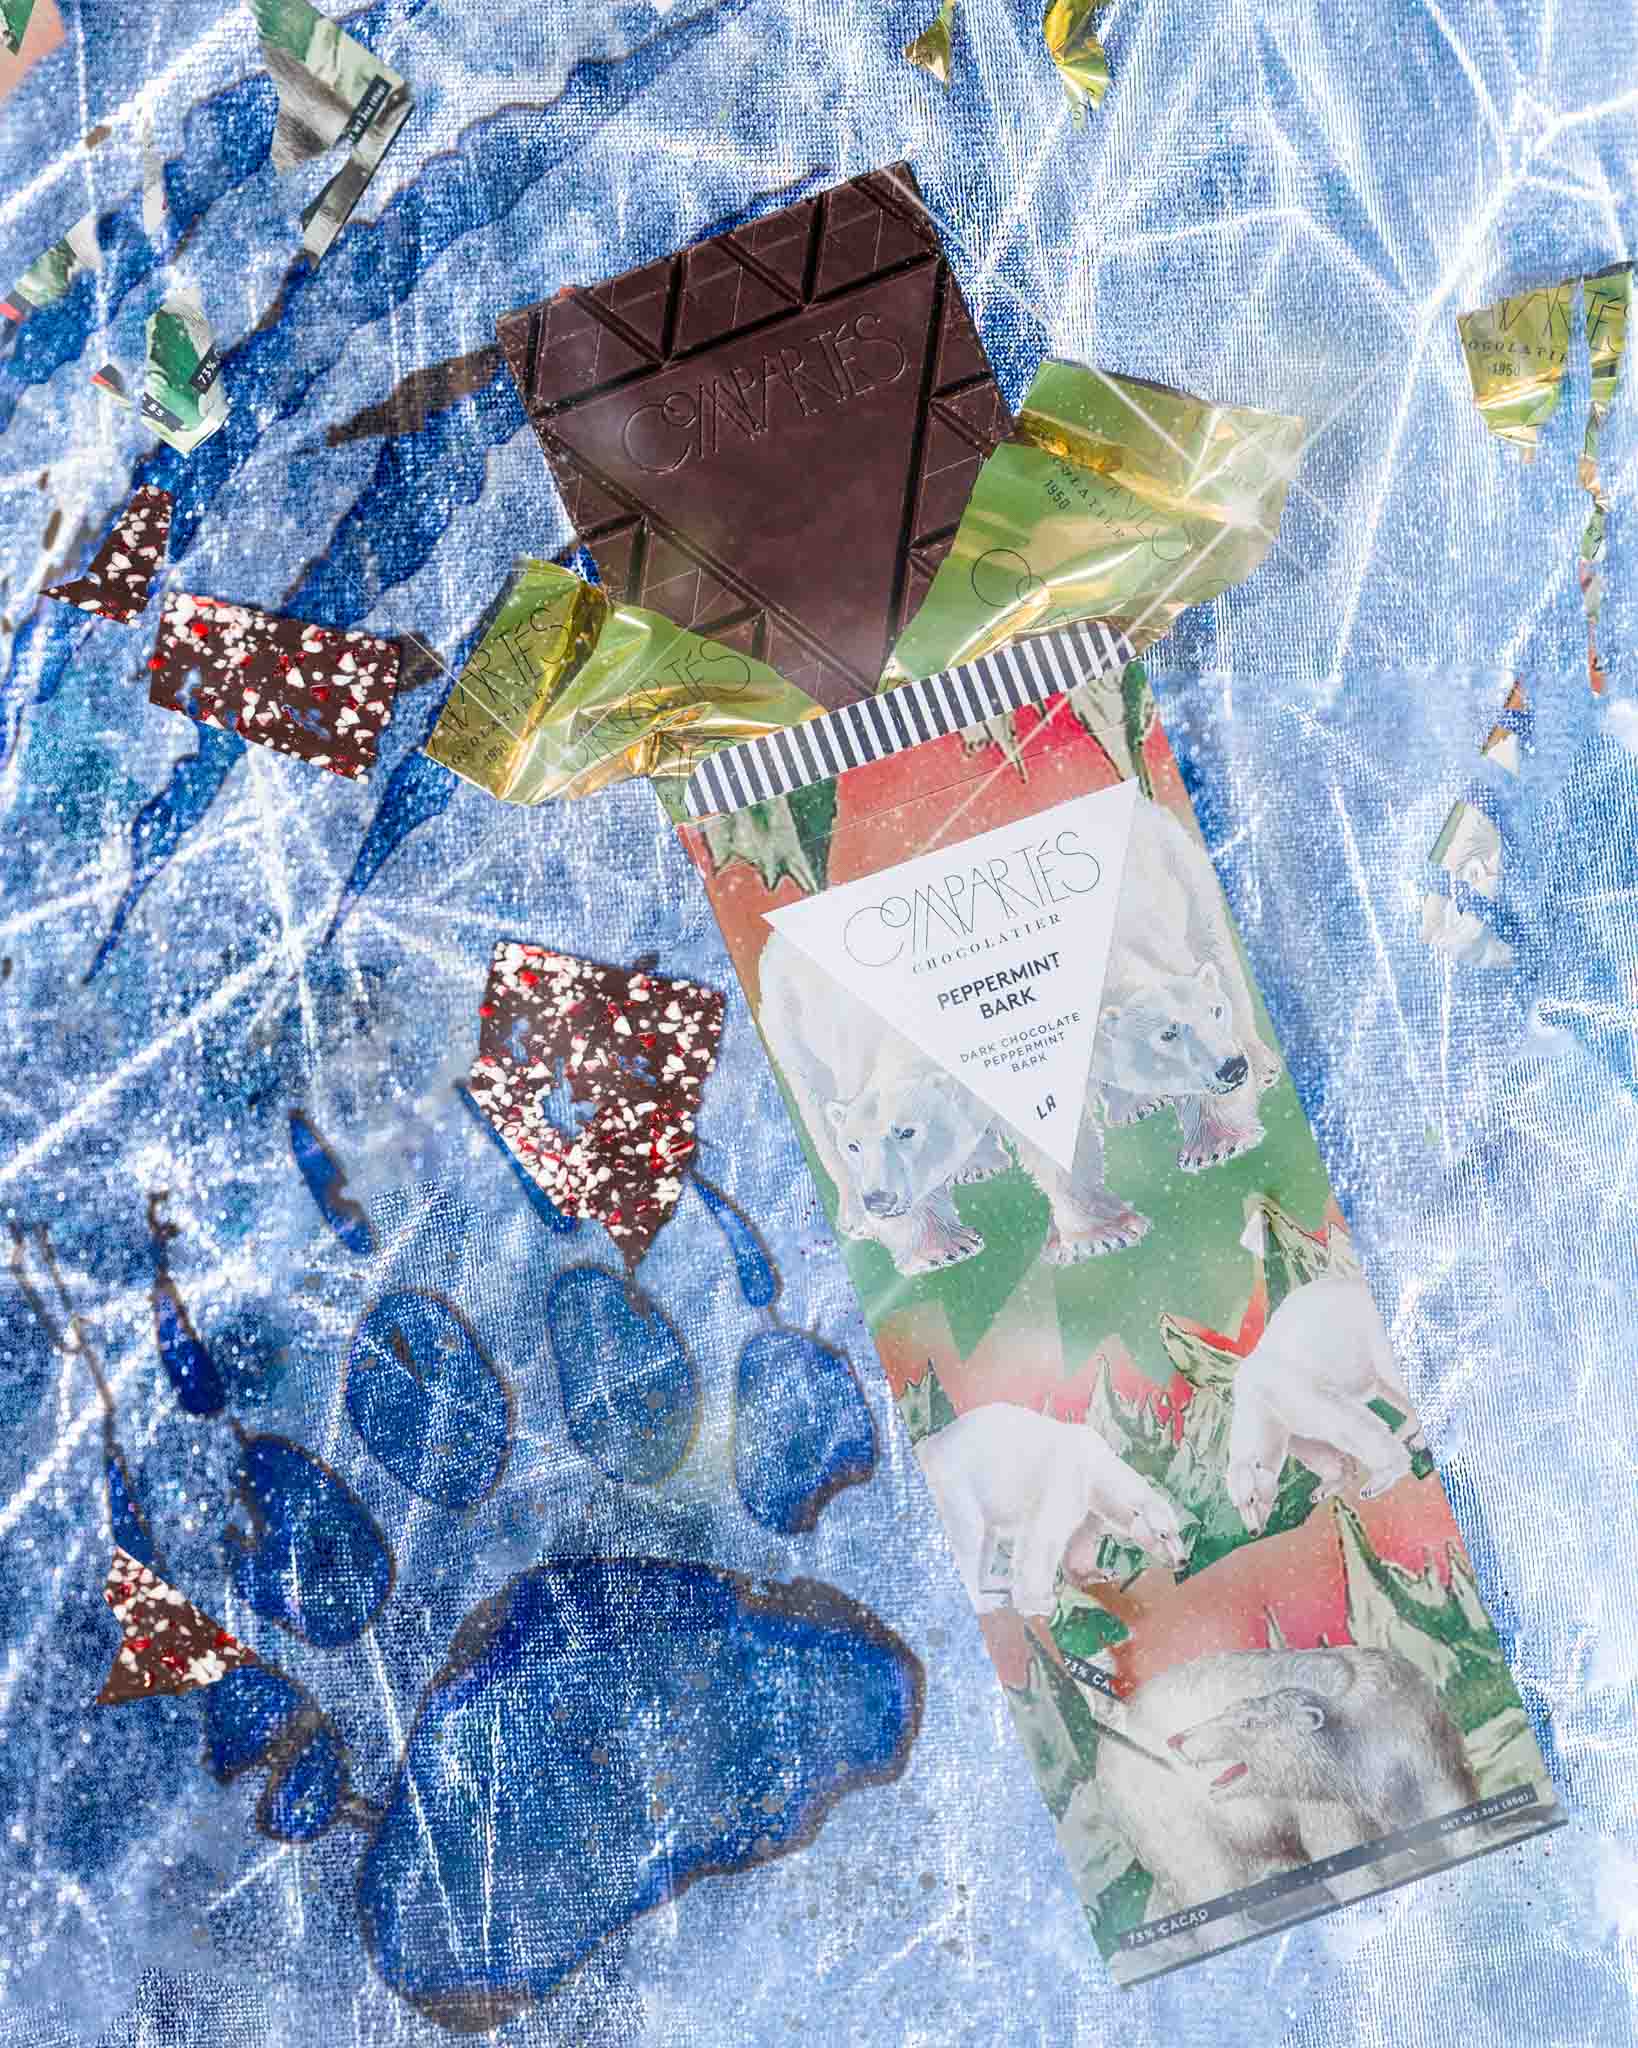 Peppermint Bark Chocolate Bar made in Los Angeles